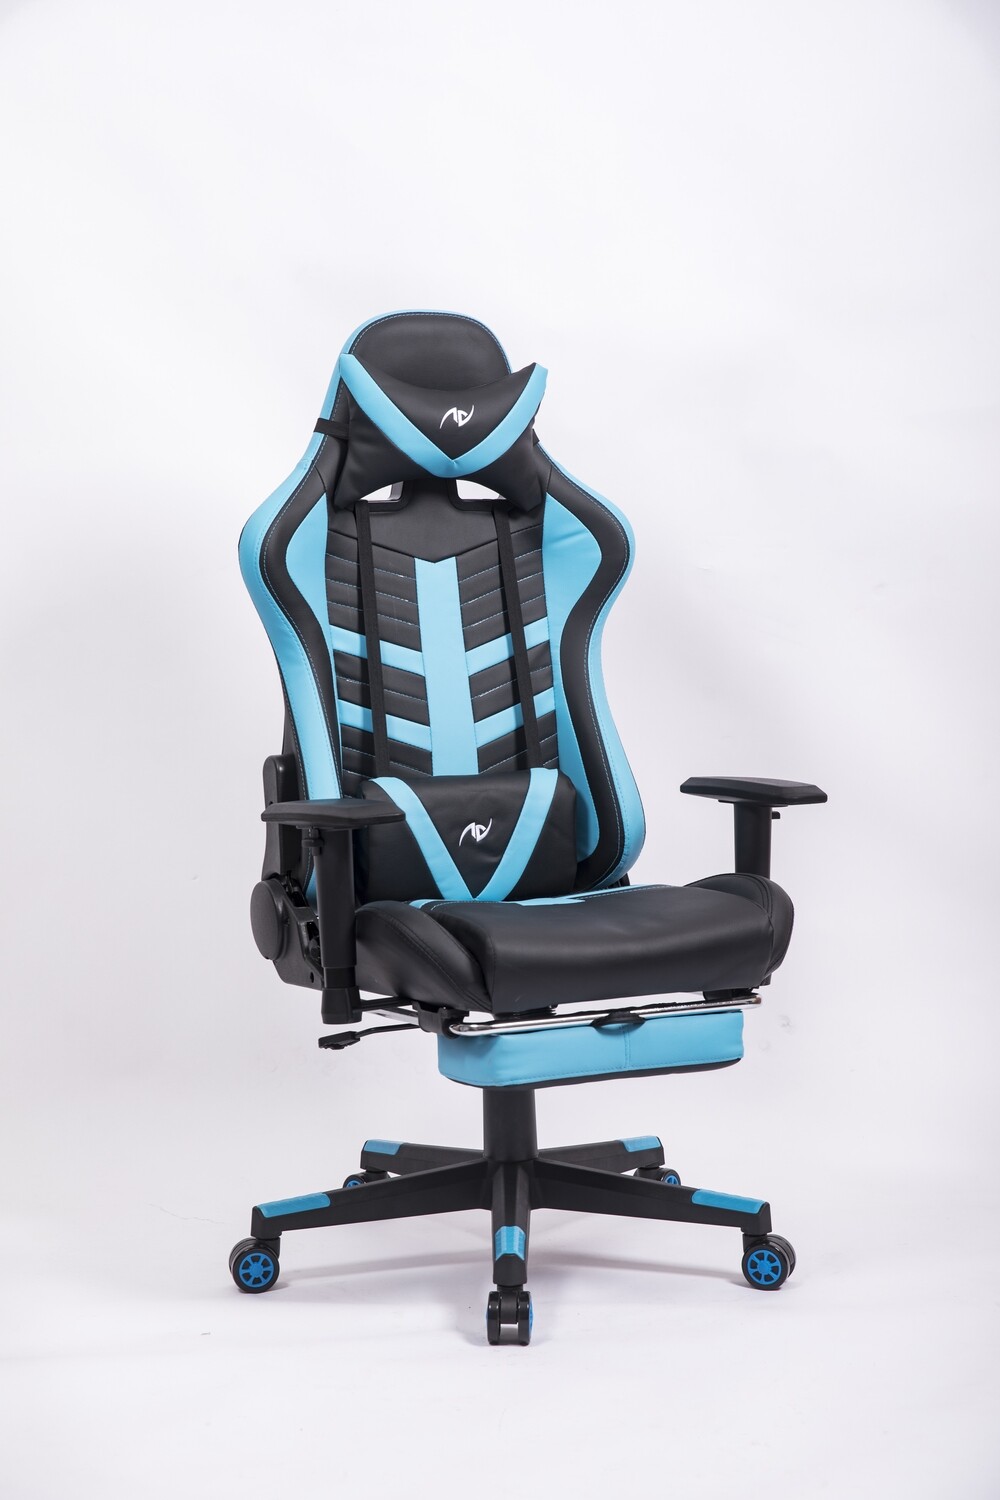 AndyGaming Blue Gaming Chair w/ Footrest